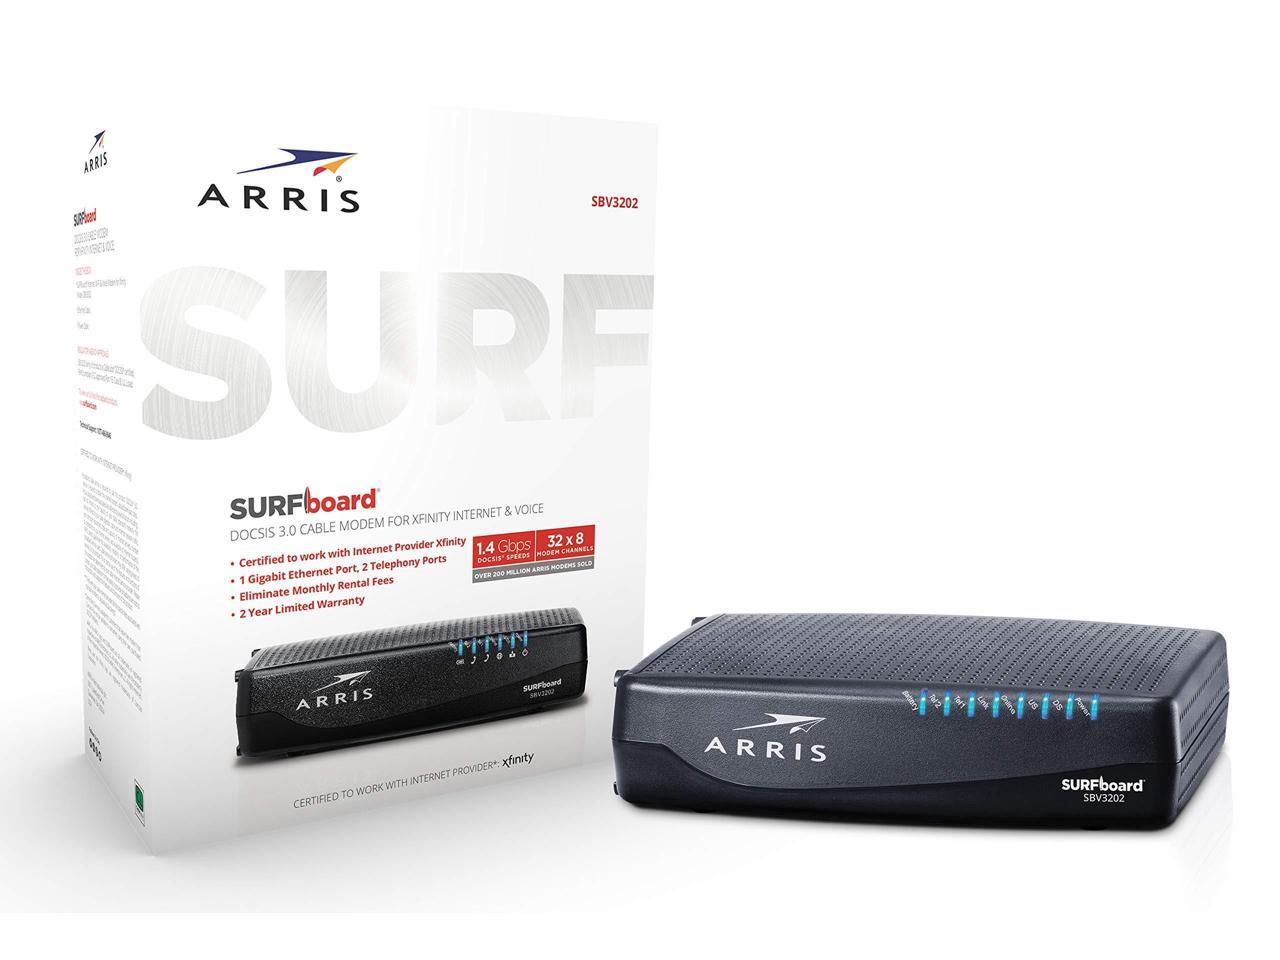 ARRIS Surfboard (32x8) Docsis 3.0 Cable Modem for Xfinity Internet & Voice (Model SBV3202)